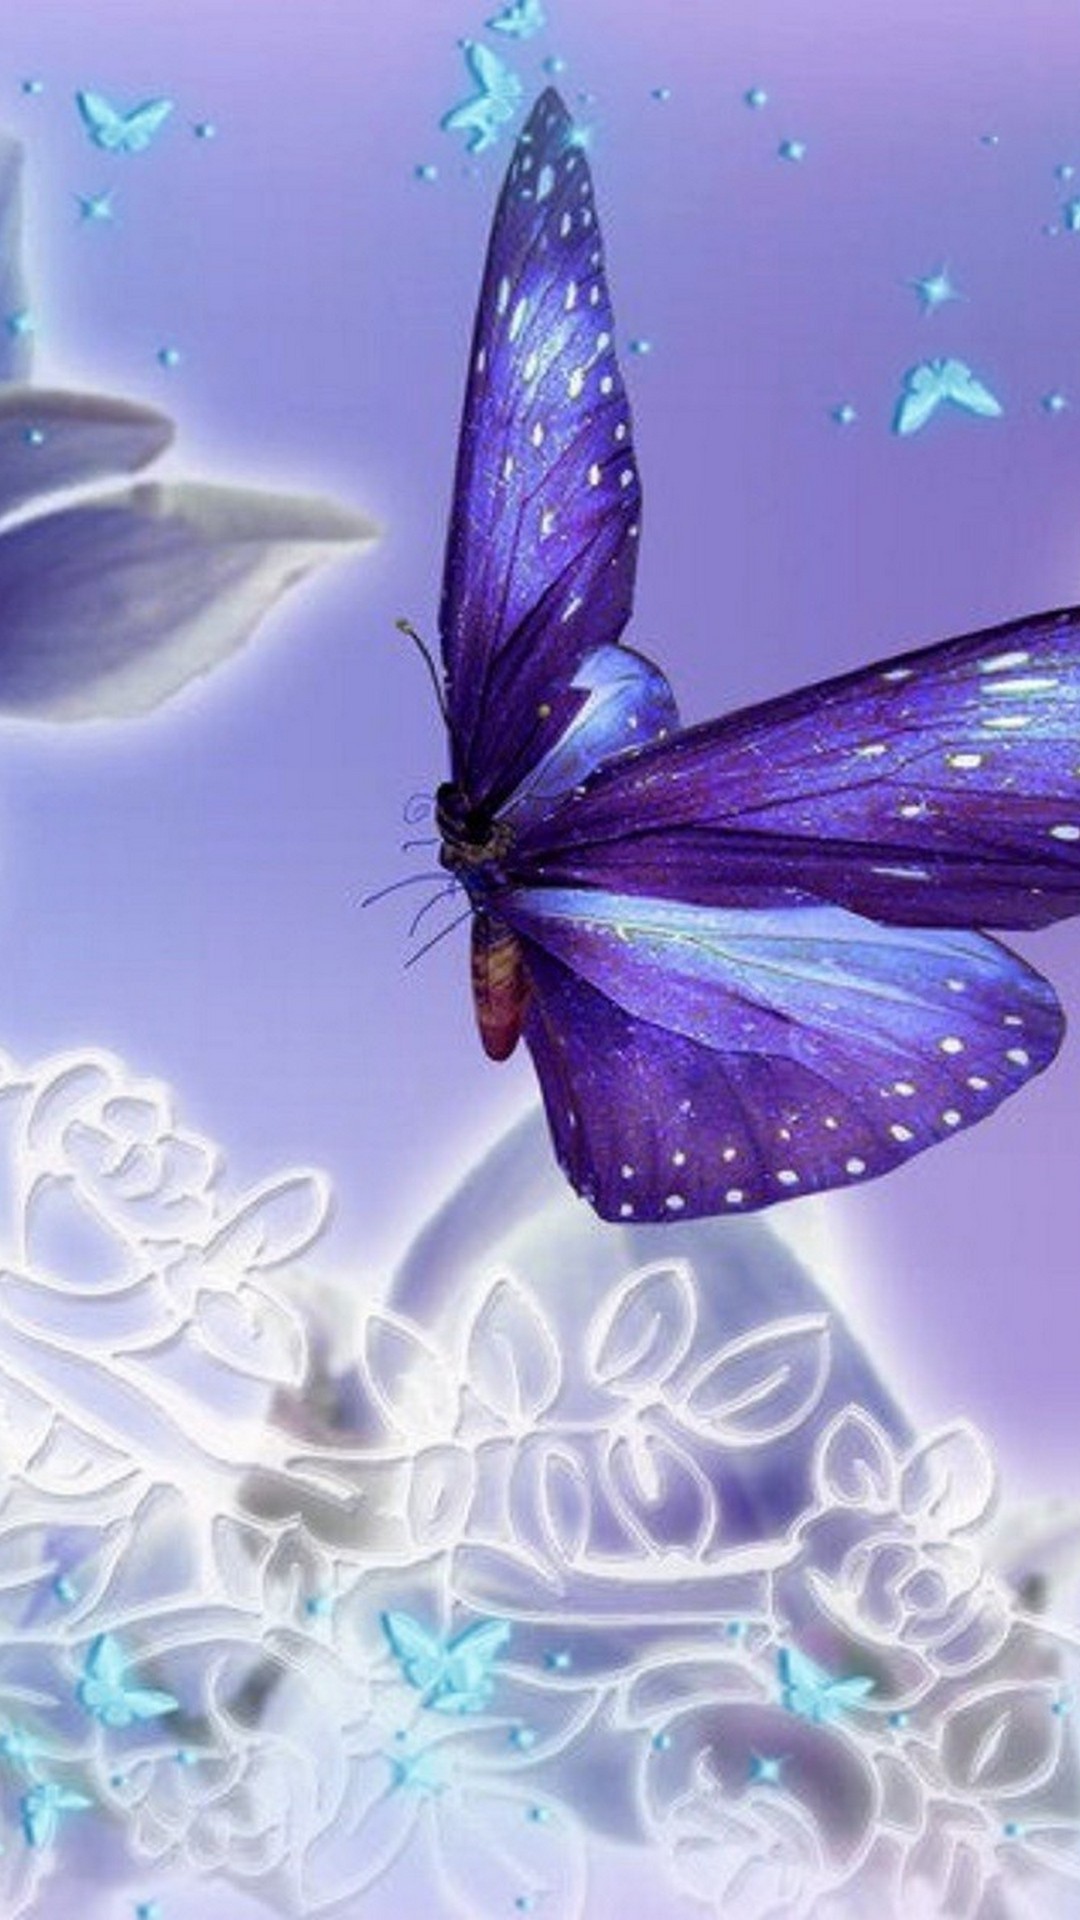 Android Wallpaper Hd Purple Butterfly With Hd Resolution - Happy New Year Butterfly - HD Wallpaper 